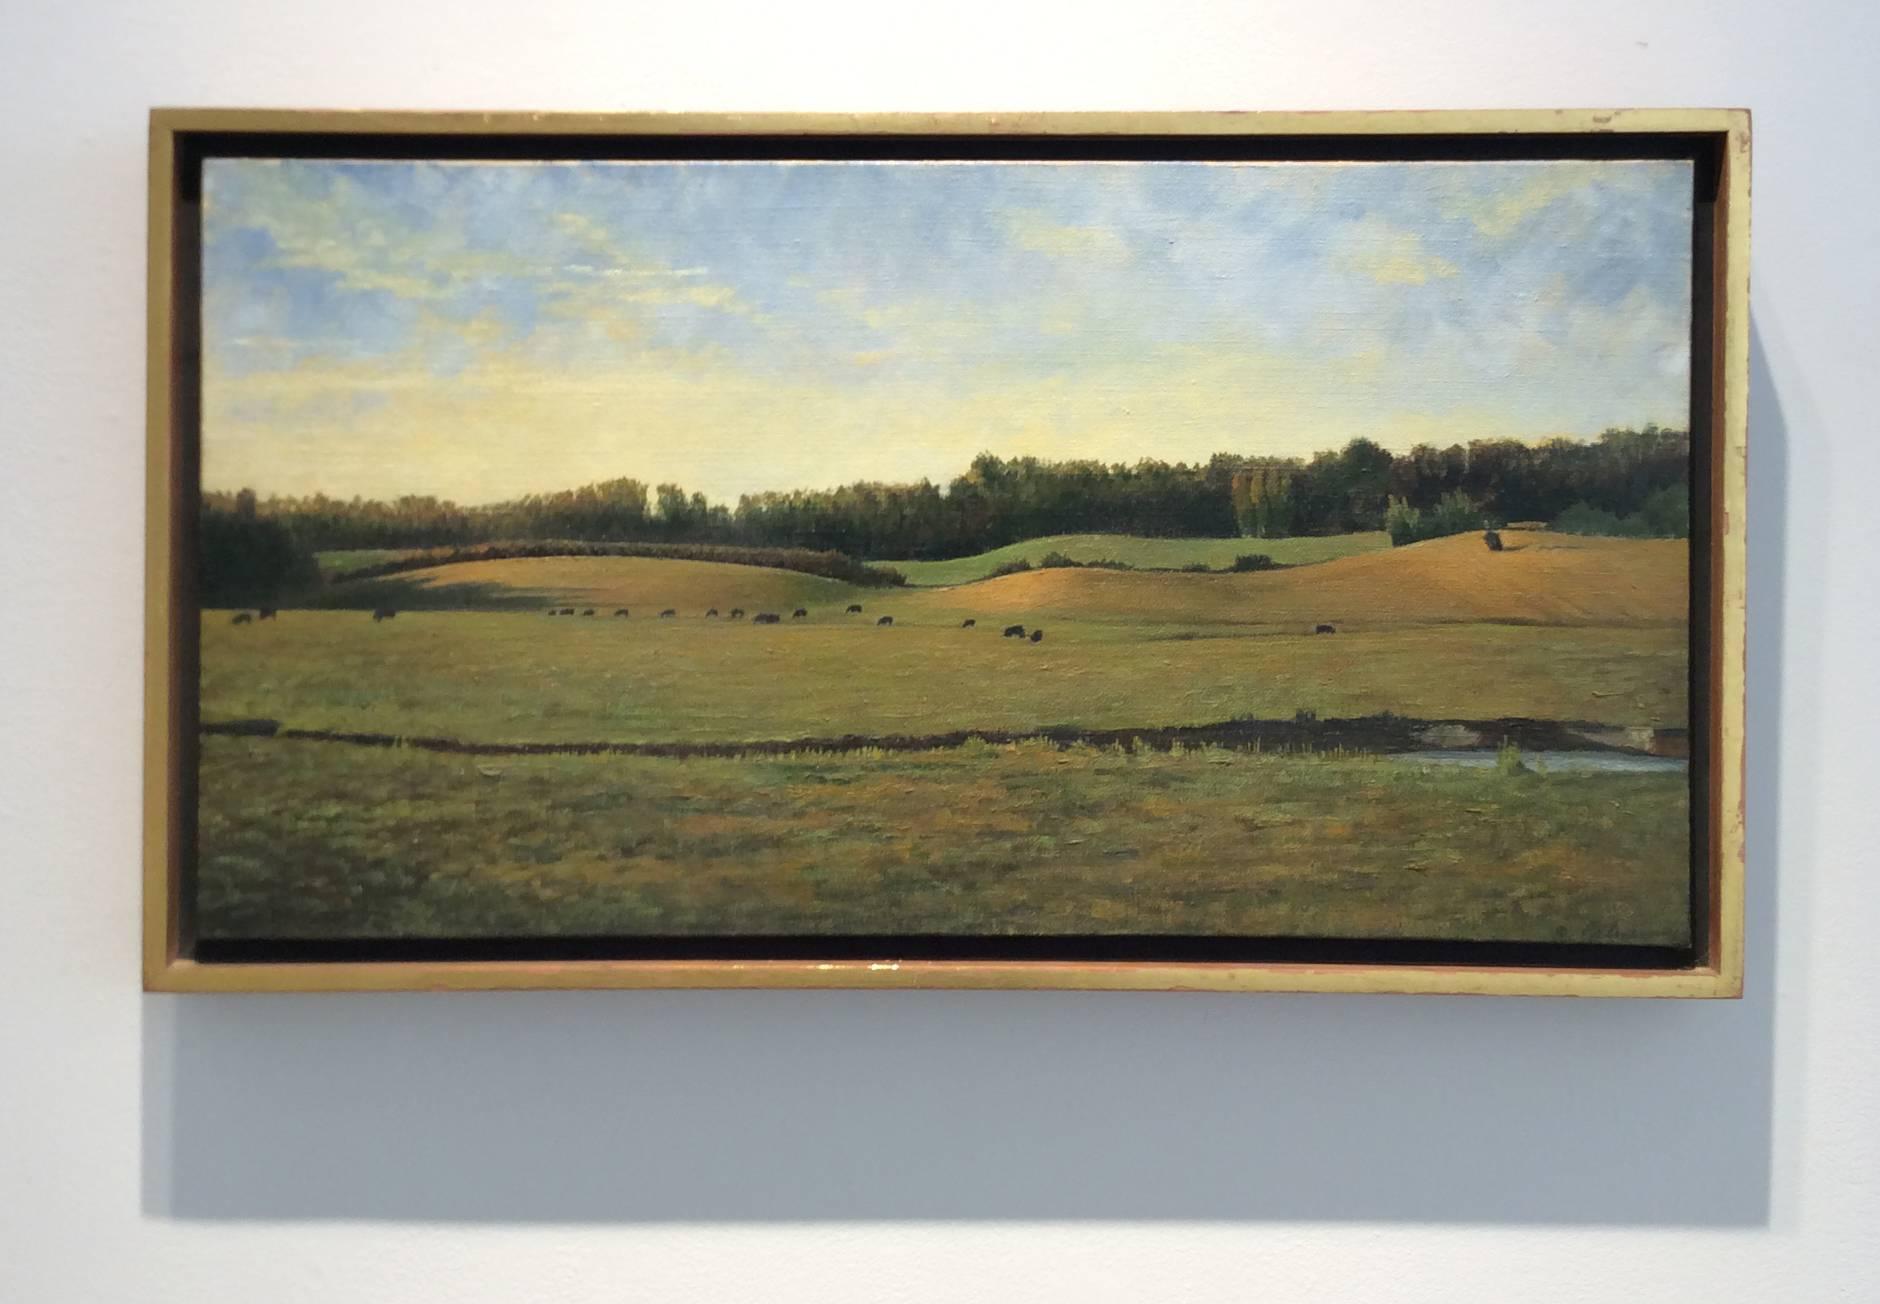 Oil on canvas
12 x 23 inches

This panoramic painting of cows grazing at dusk was created by landscape painter Leigh Palmer a few years after his move to the Hudson River Valley. The image possesses a serene, pastoral essence, with rolling green and